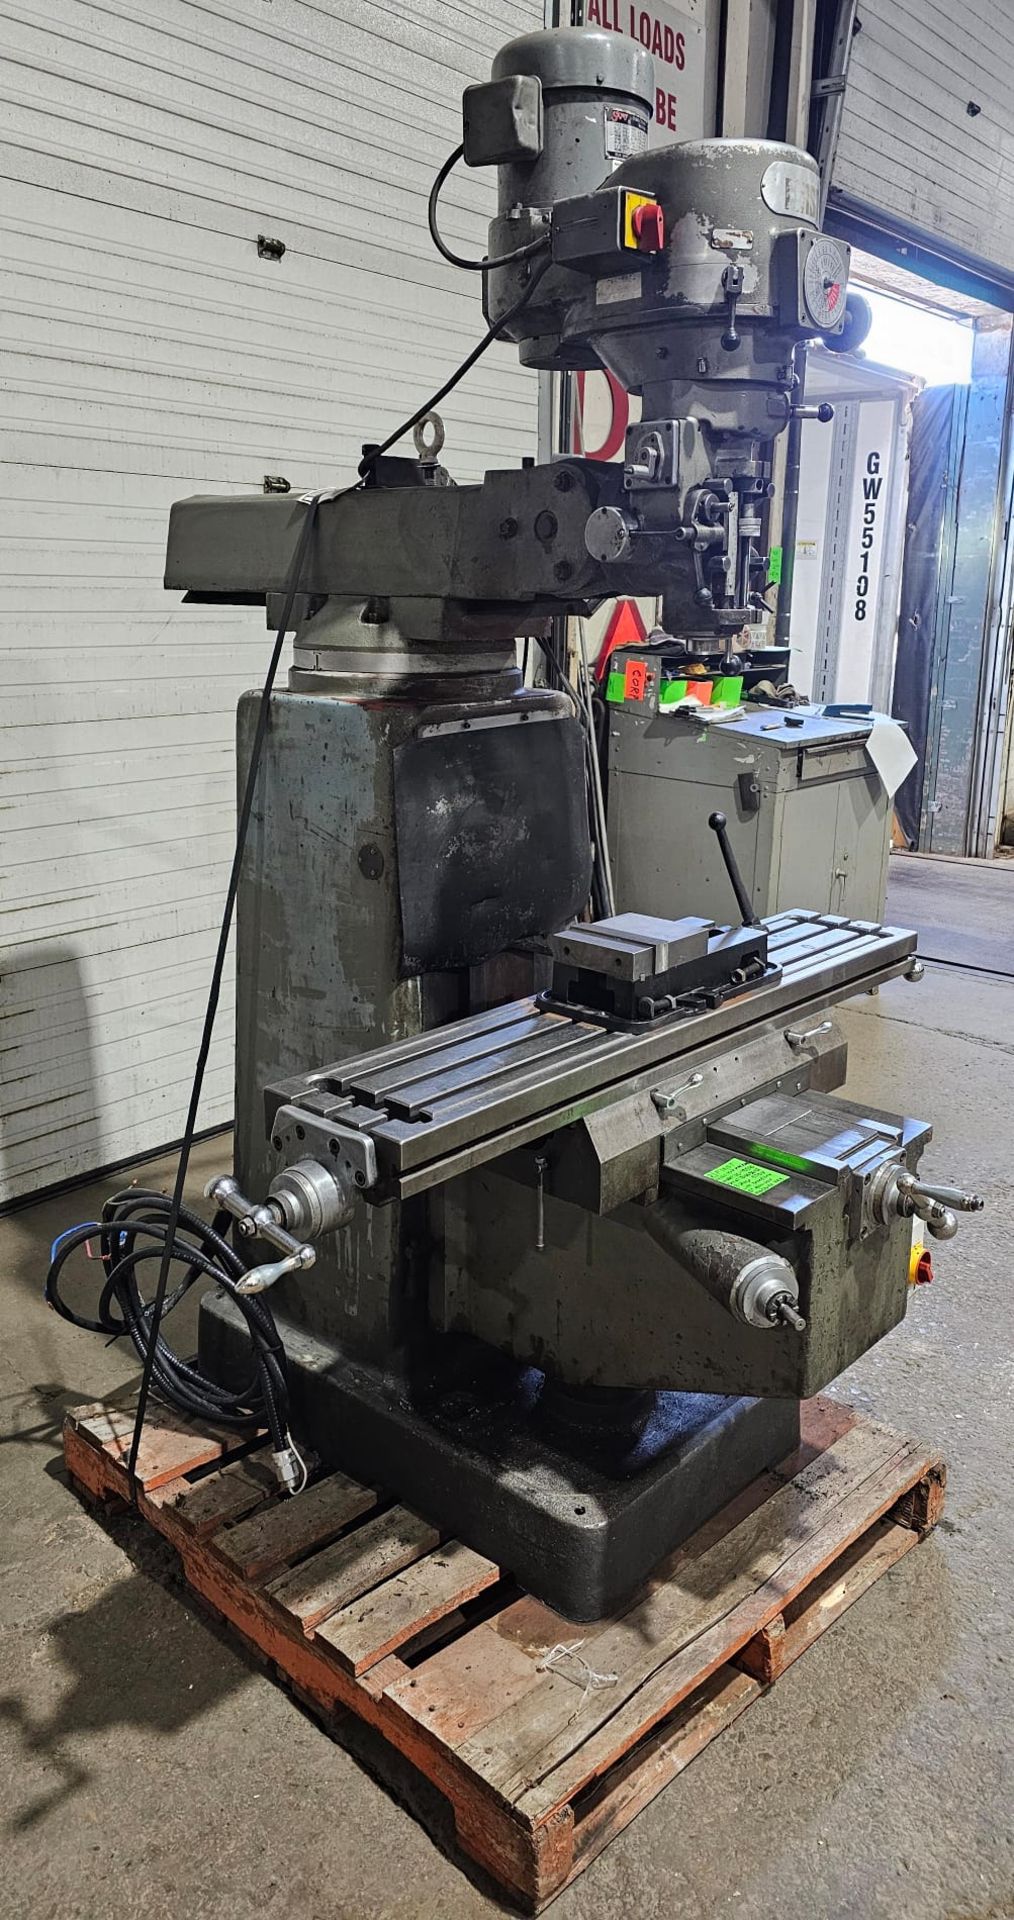 2008 FIRST MILLING MACHINE mode lC-1-1/2VS With brand new 6" accu-lock machine vice 3 phase - Image 3 of 7